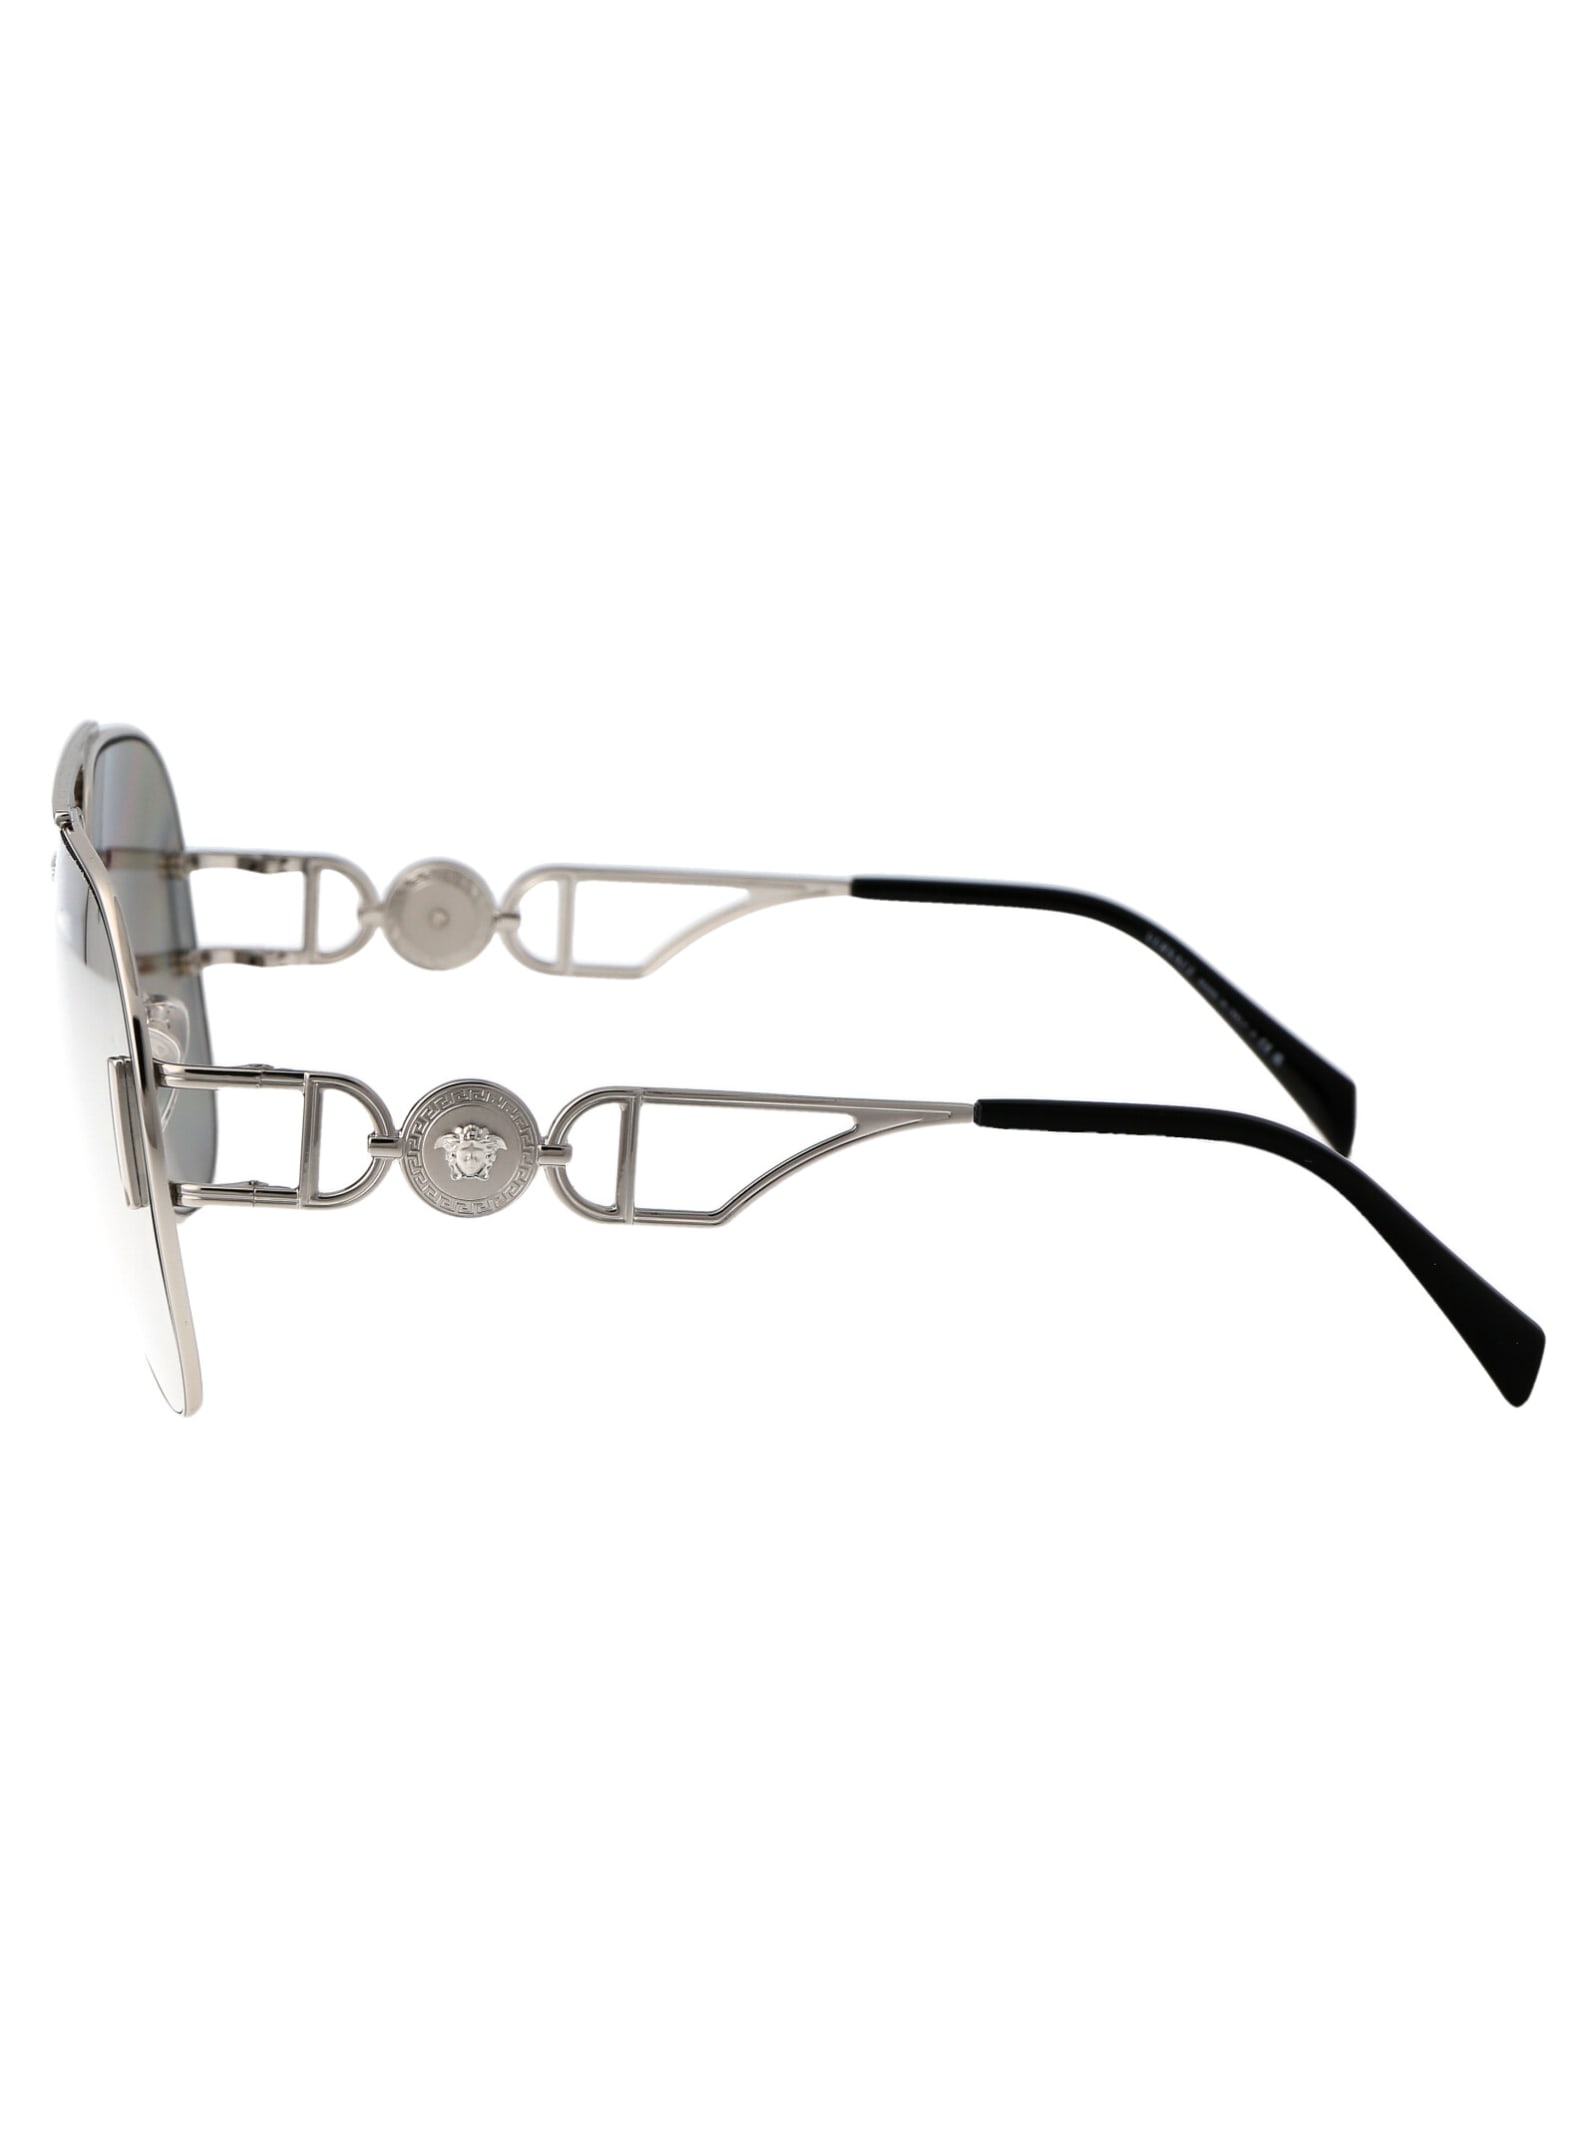 Shop Versace 0ve2255 Sunglasses In 10006g Silver